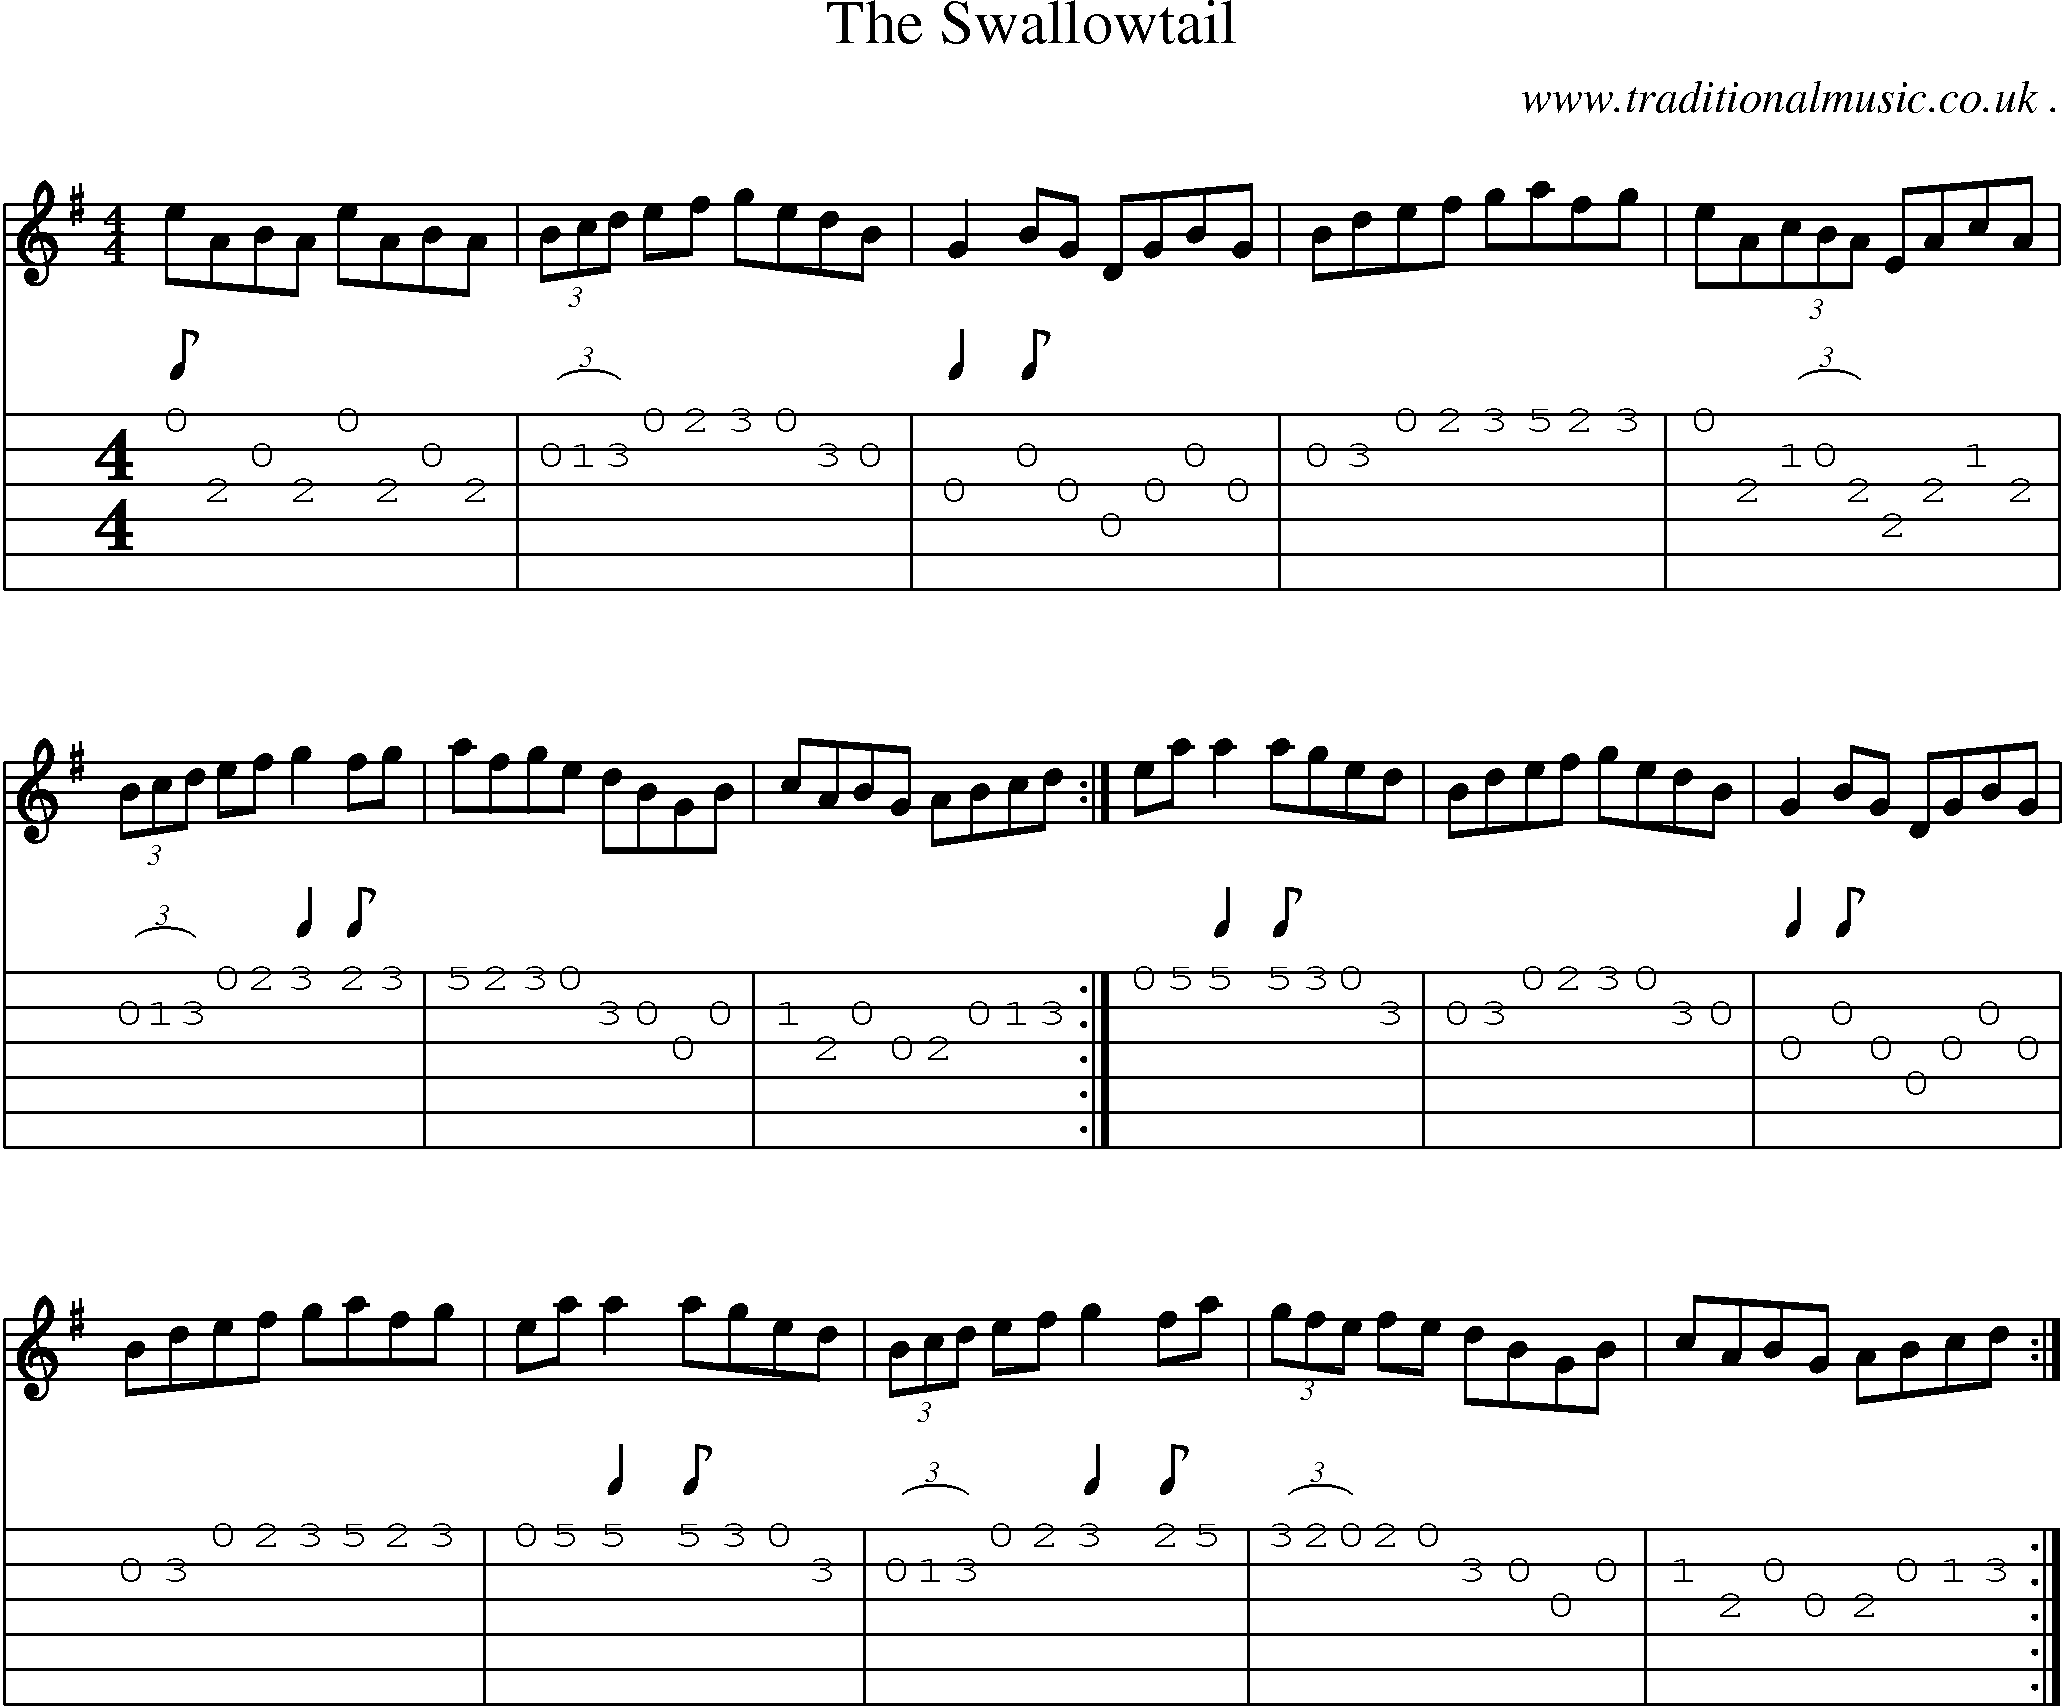 Sheet-Music and Guitar Tabs for The Swallowtail